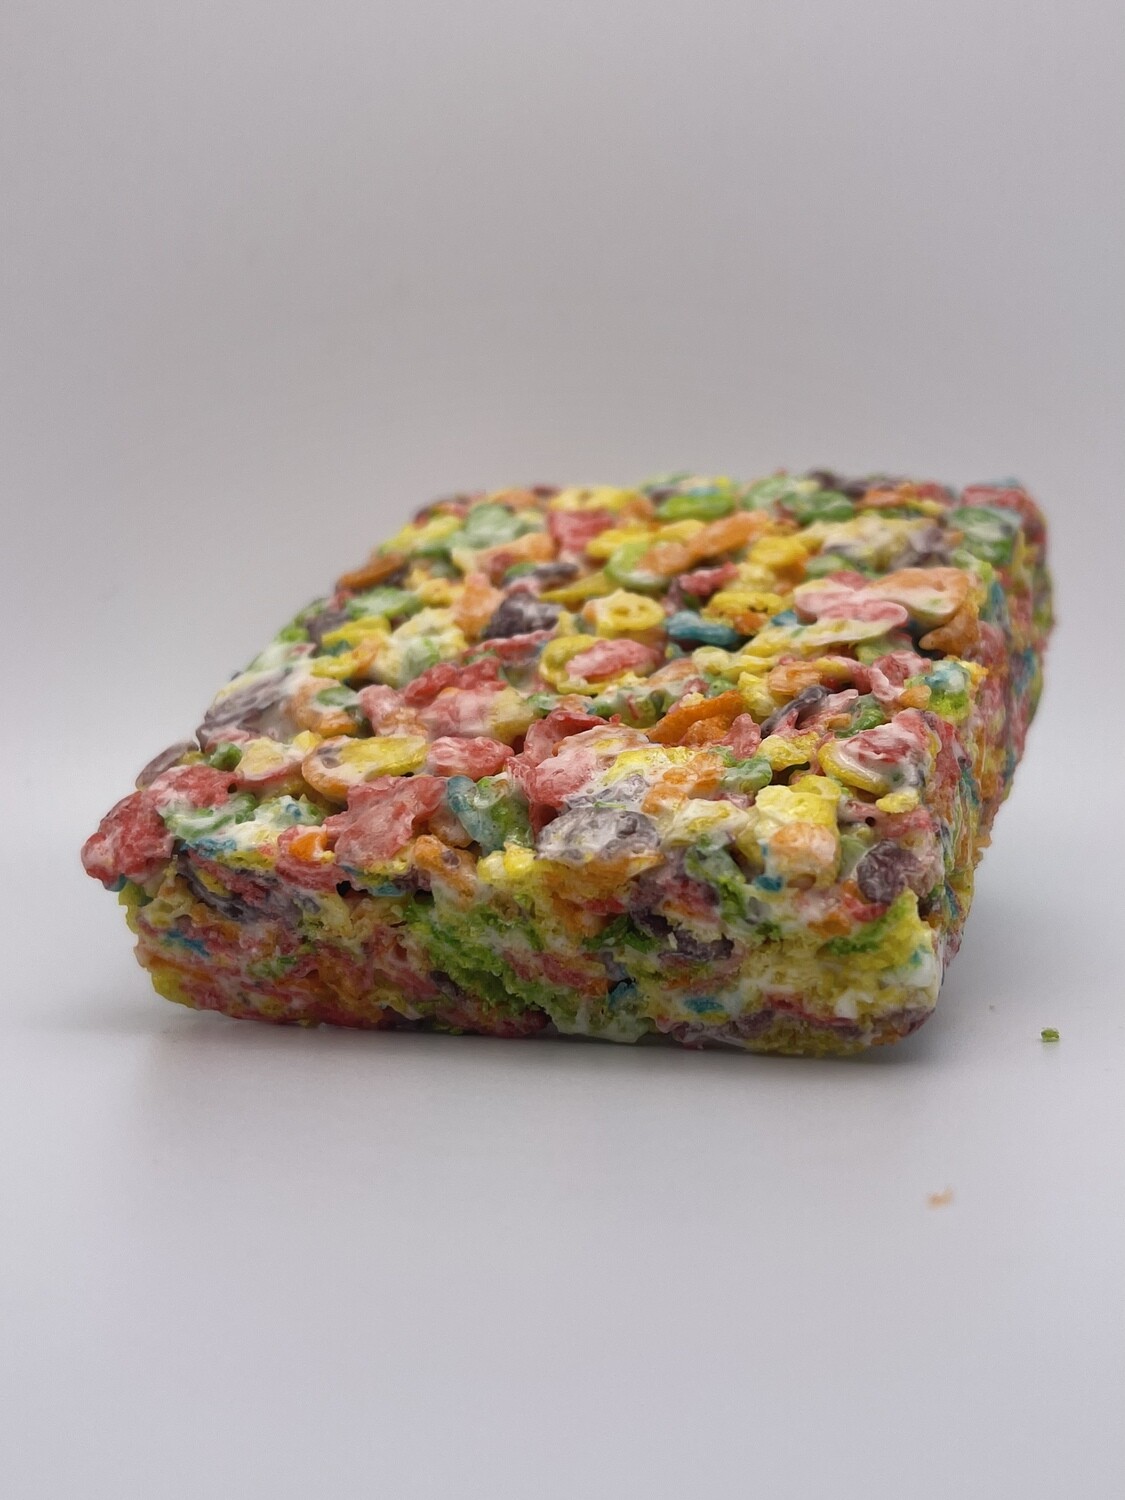 CEREAL BARS